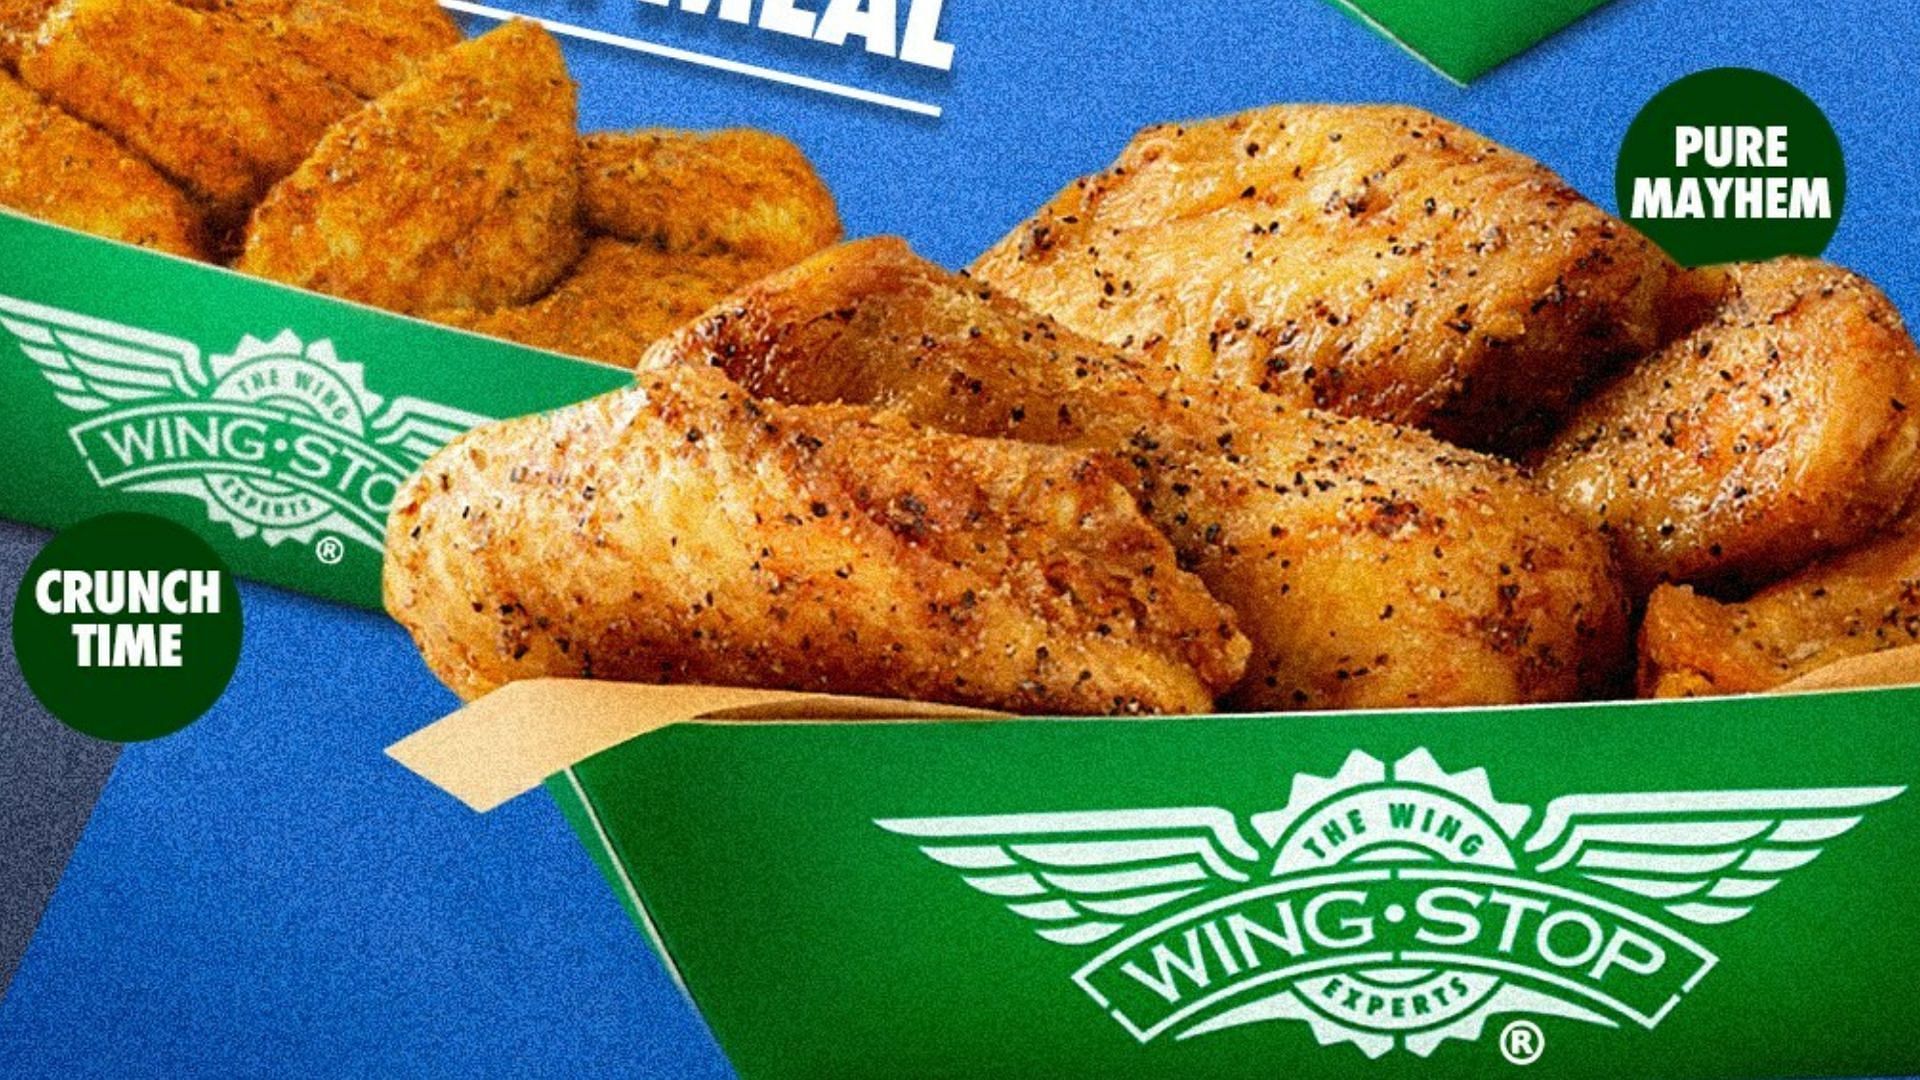 The Pure Mayhem, Crunch Time, and Meltdown wings flavors come right in time for the Basketball Tournament season (Image via Wingstop)